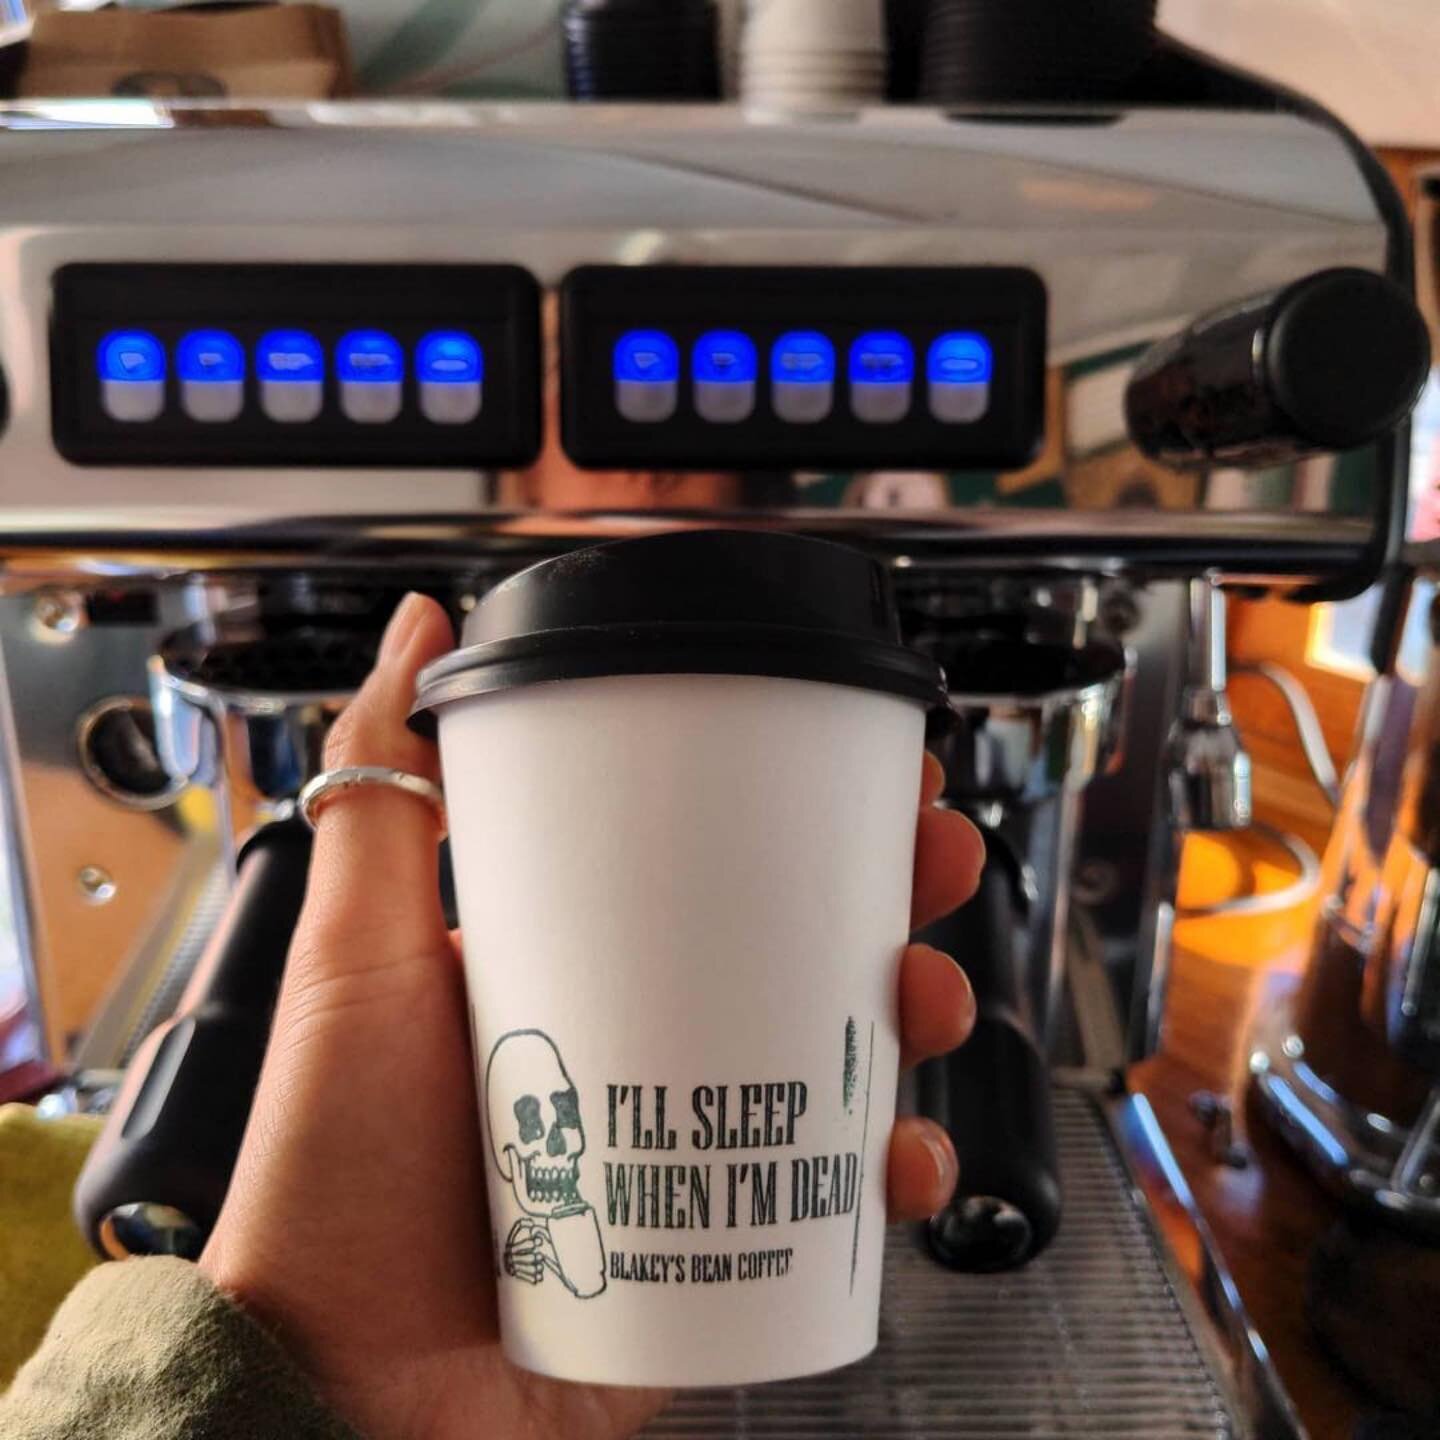 Coffee Time? ☕️ Come down to Mount Waverley Village this morning to grab a delicious coffee from @blakeysbean.coffee 
.
.
.
.

#mountwaverleyvillagemarket #blakeysbeancoffee #mountwaverleyrotary #melbournemarket #christmasinmelbourne #melbourneweeken